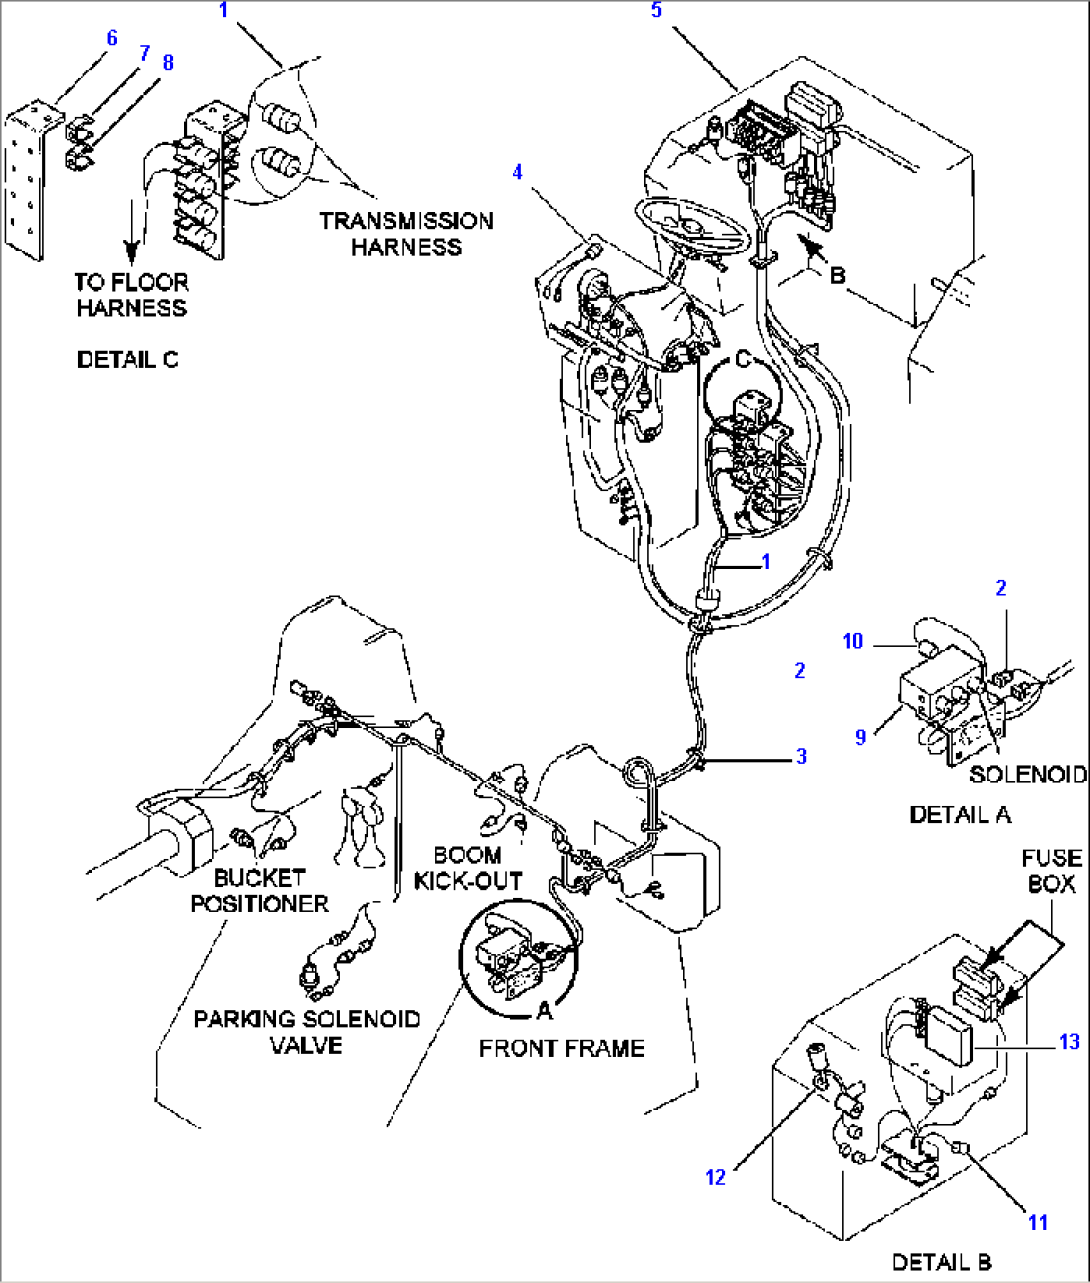 FIG NO. 1432 ELECTRICAL SYSTEM ELECTRONICALLY CONTROLLED SUSPENSION SYSTEM (E.C.S.S.)